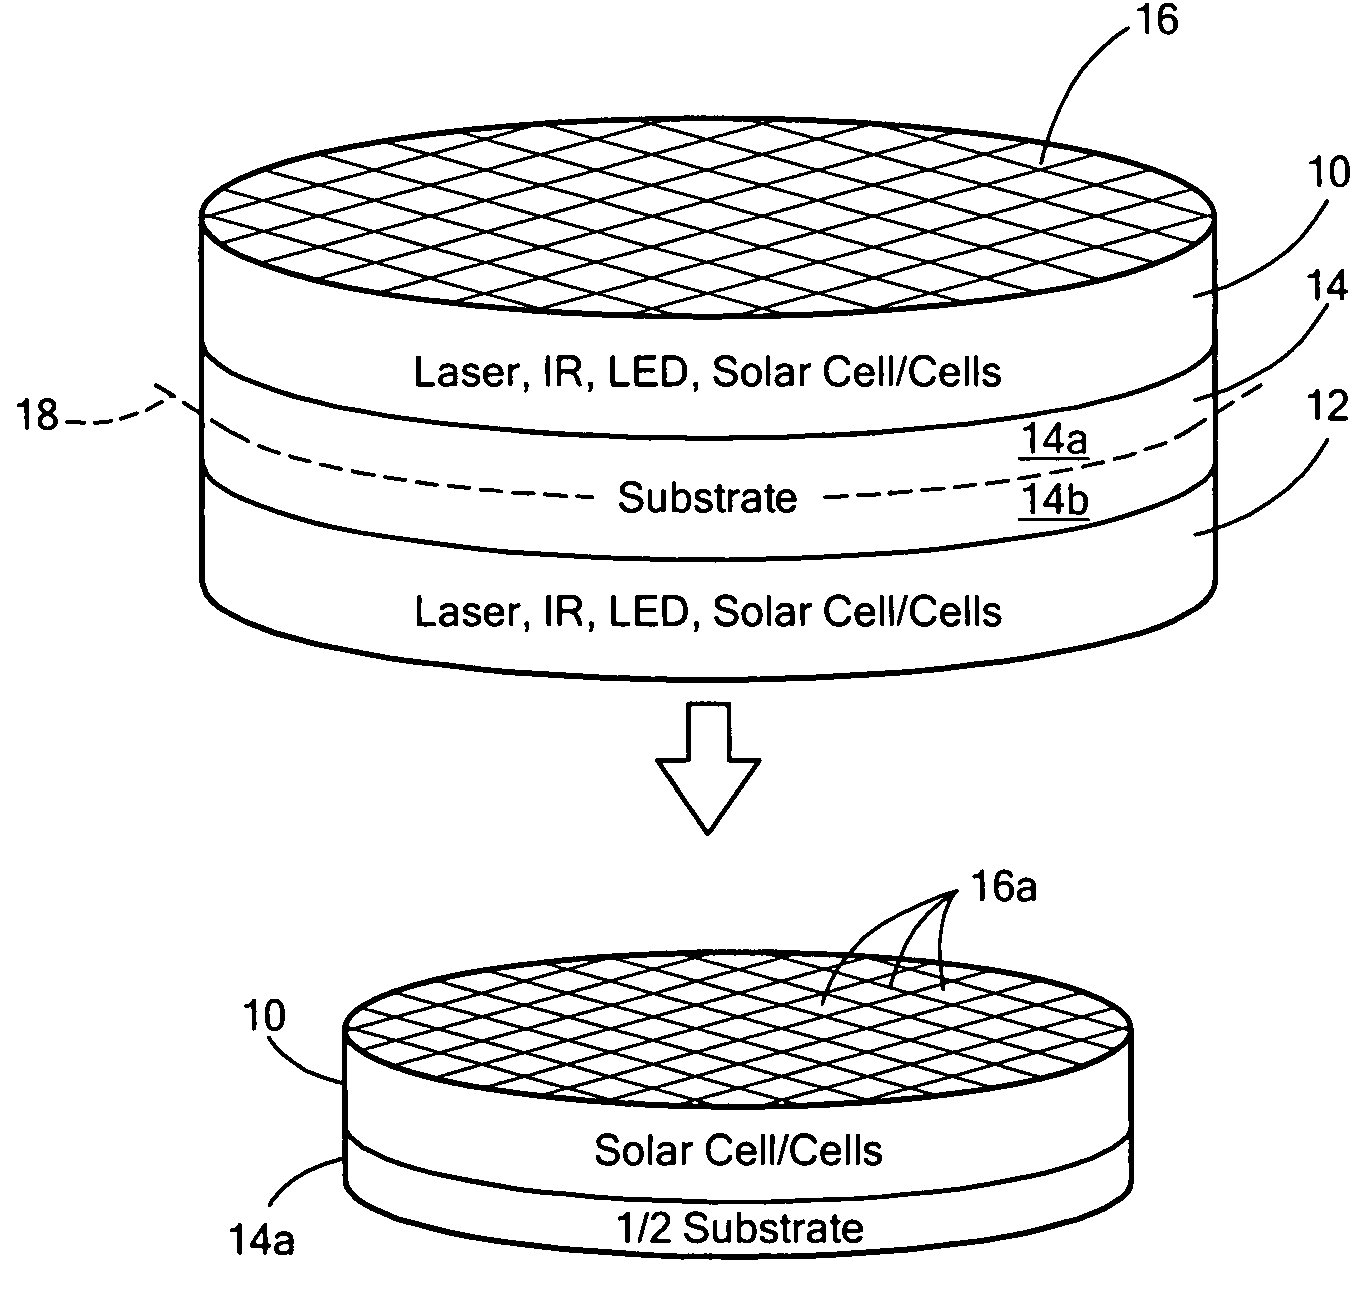 Method of fabricating epitaxial structures